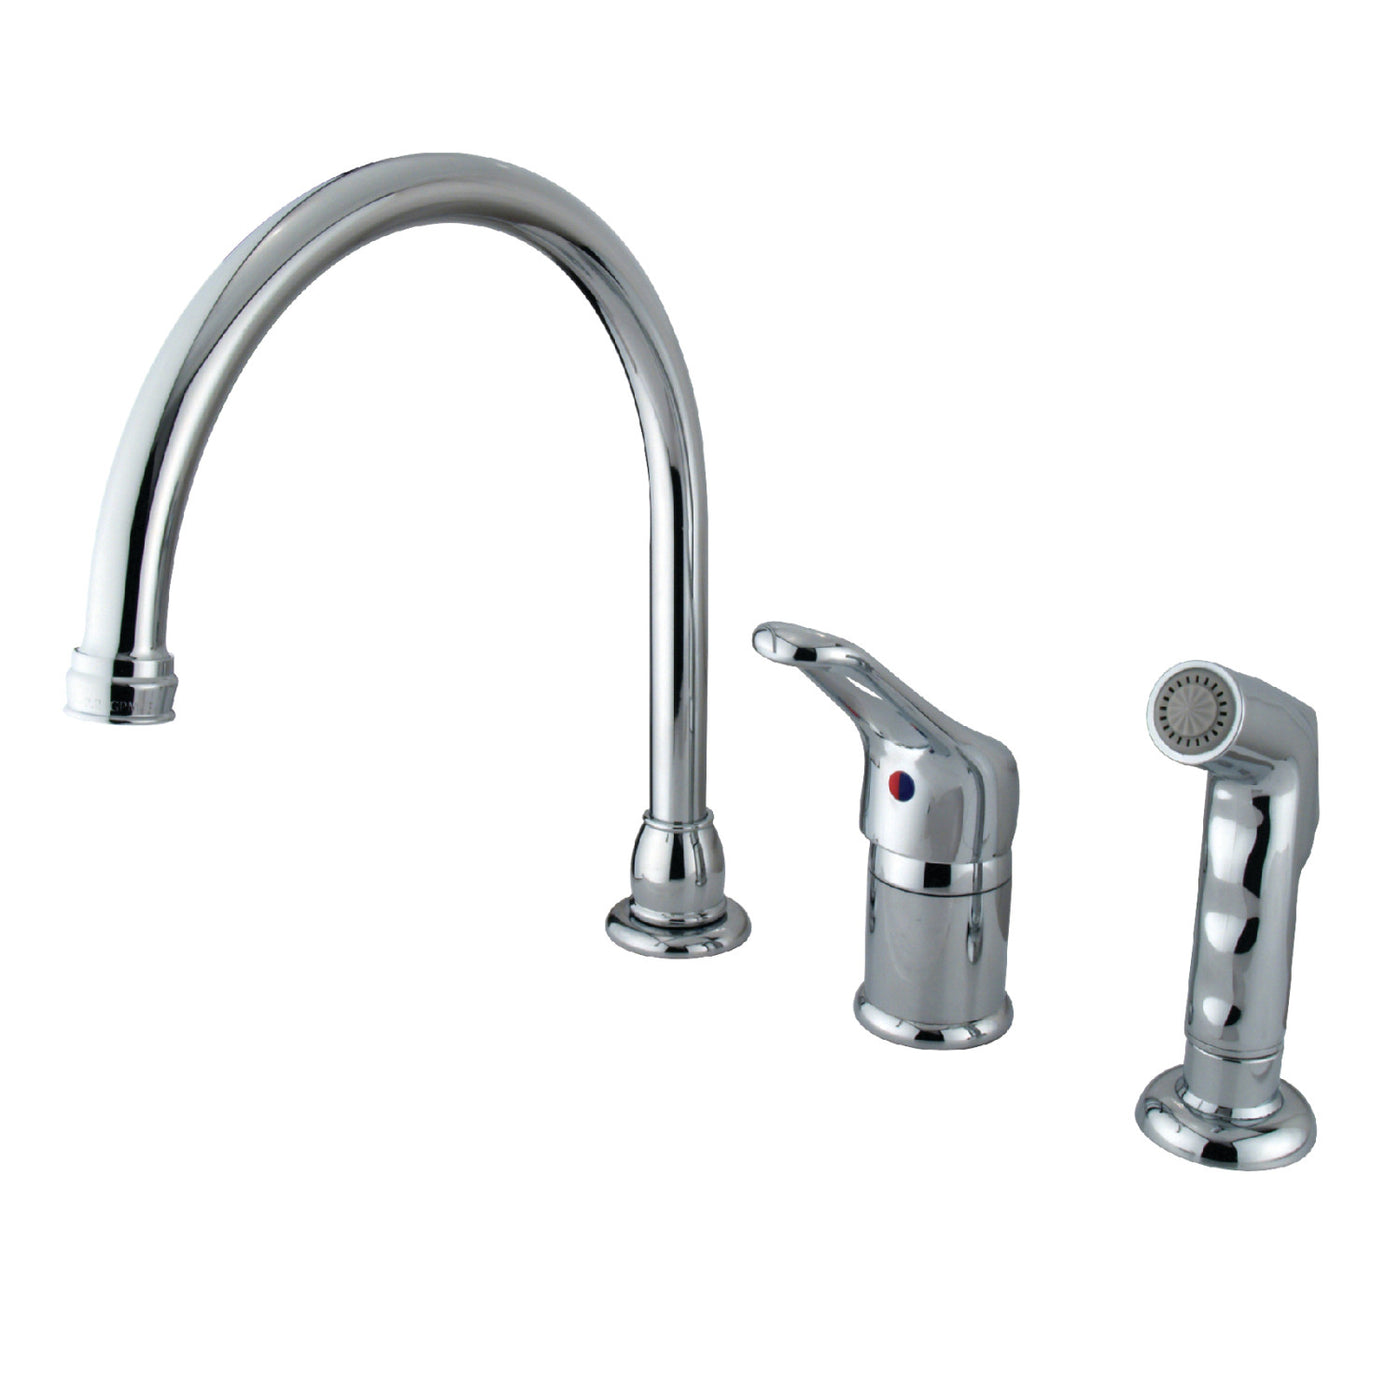 Elements of Design EB811 Single-Handle Widespread Kitchen Faucet Combo, Polished Chrome